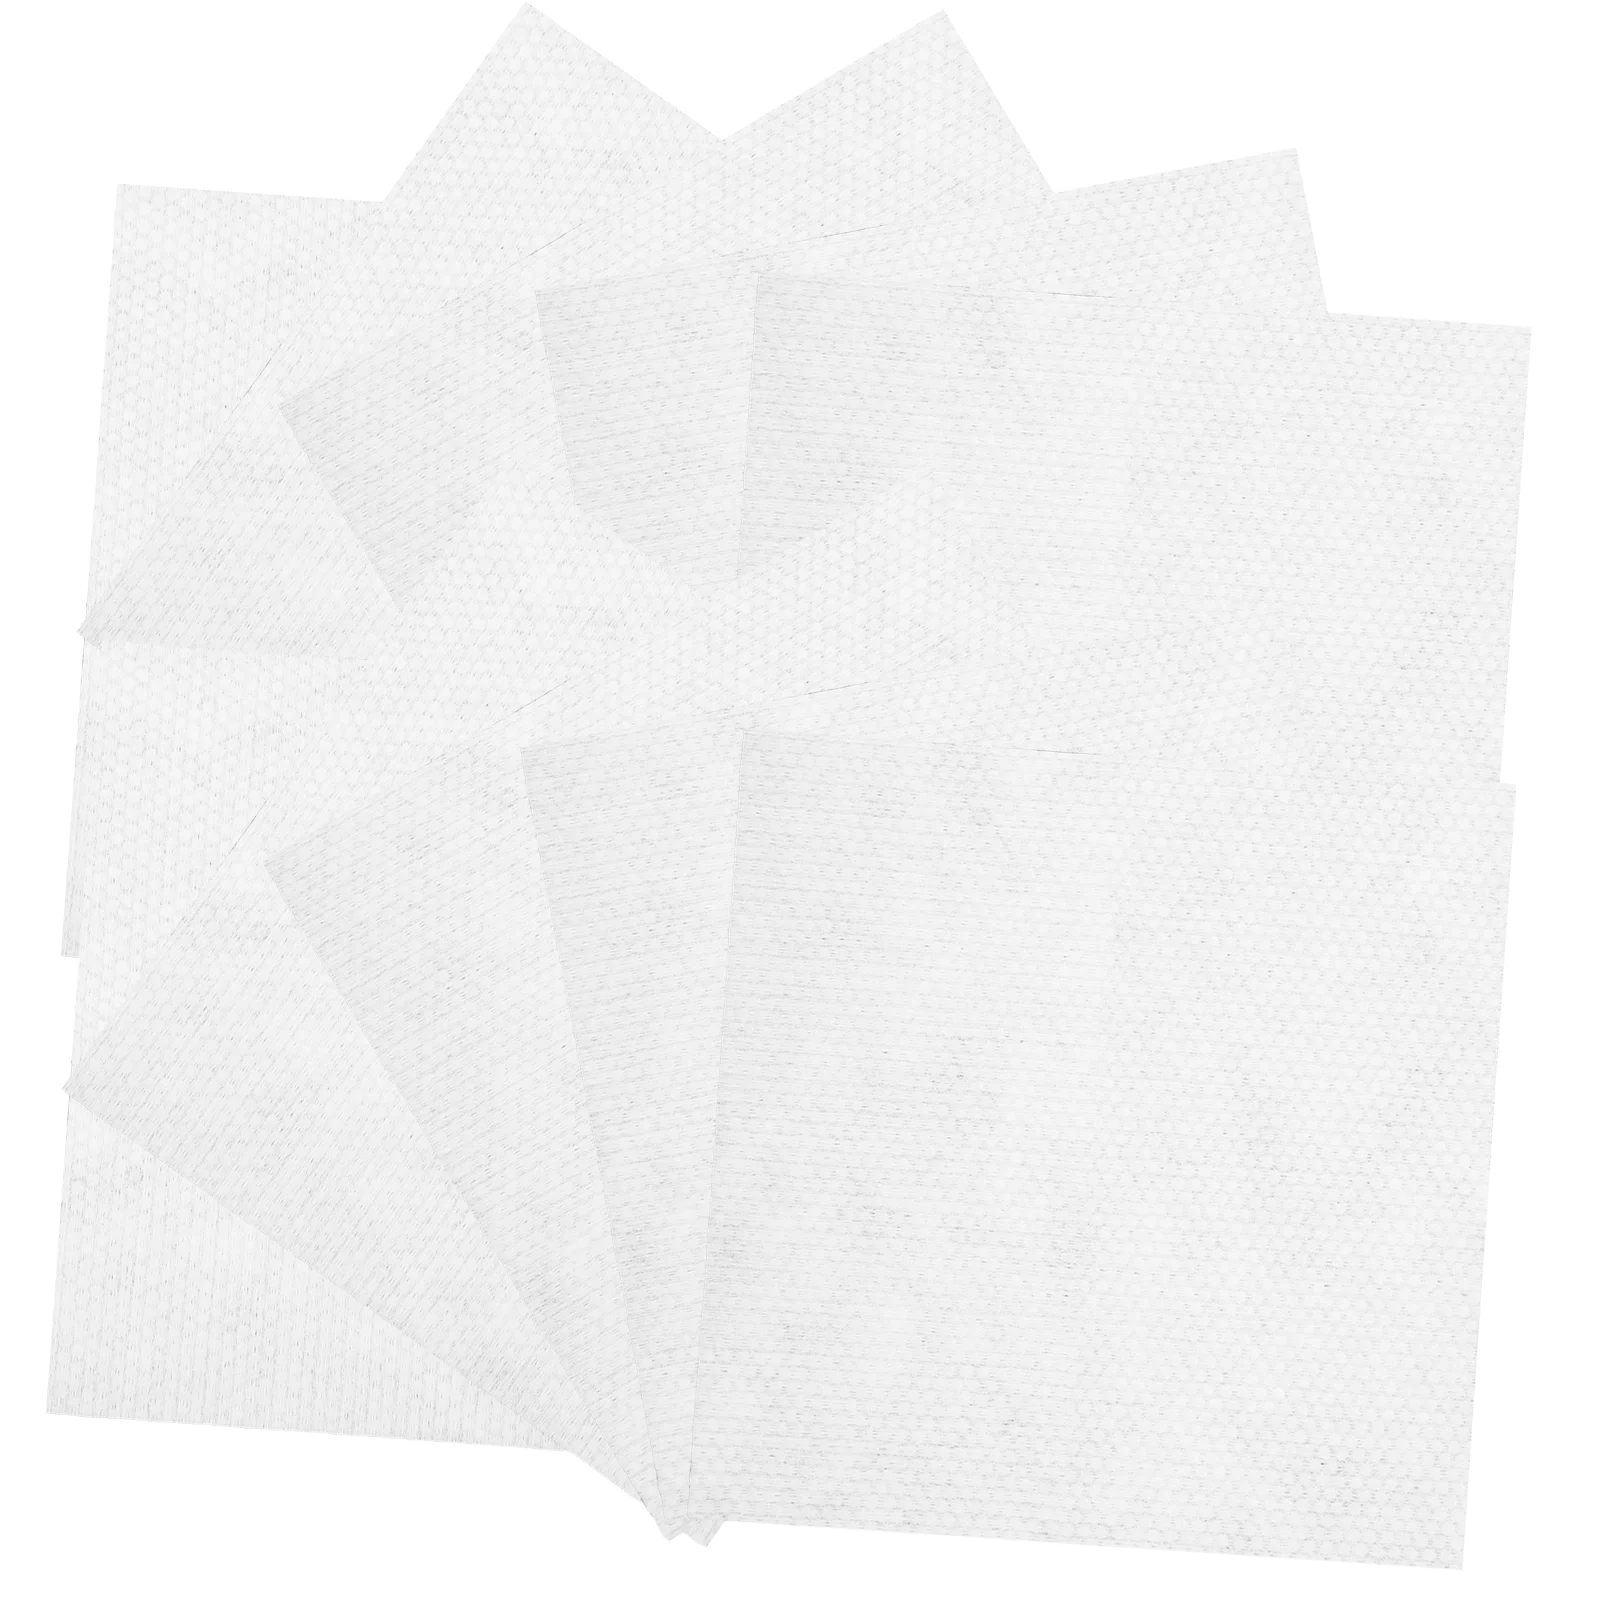 

Towel Disposable Paper Napkins Face Hand Tissue Towels Facial Washing Wedding Make Up Removing Skin Cleansing Cloths